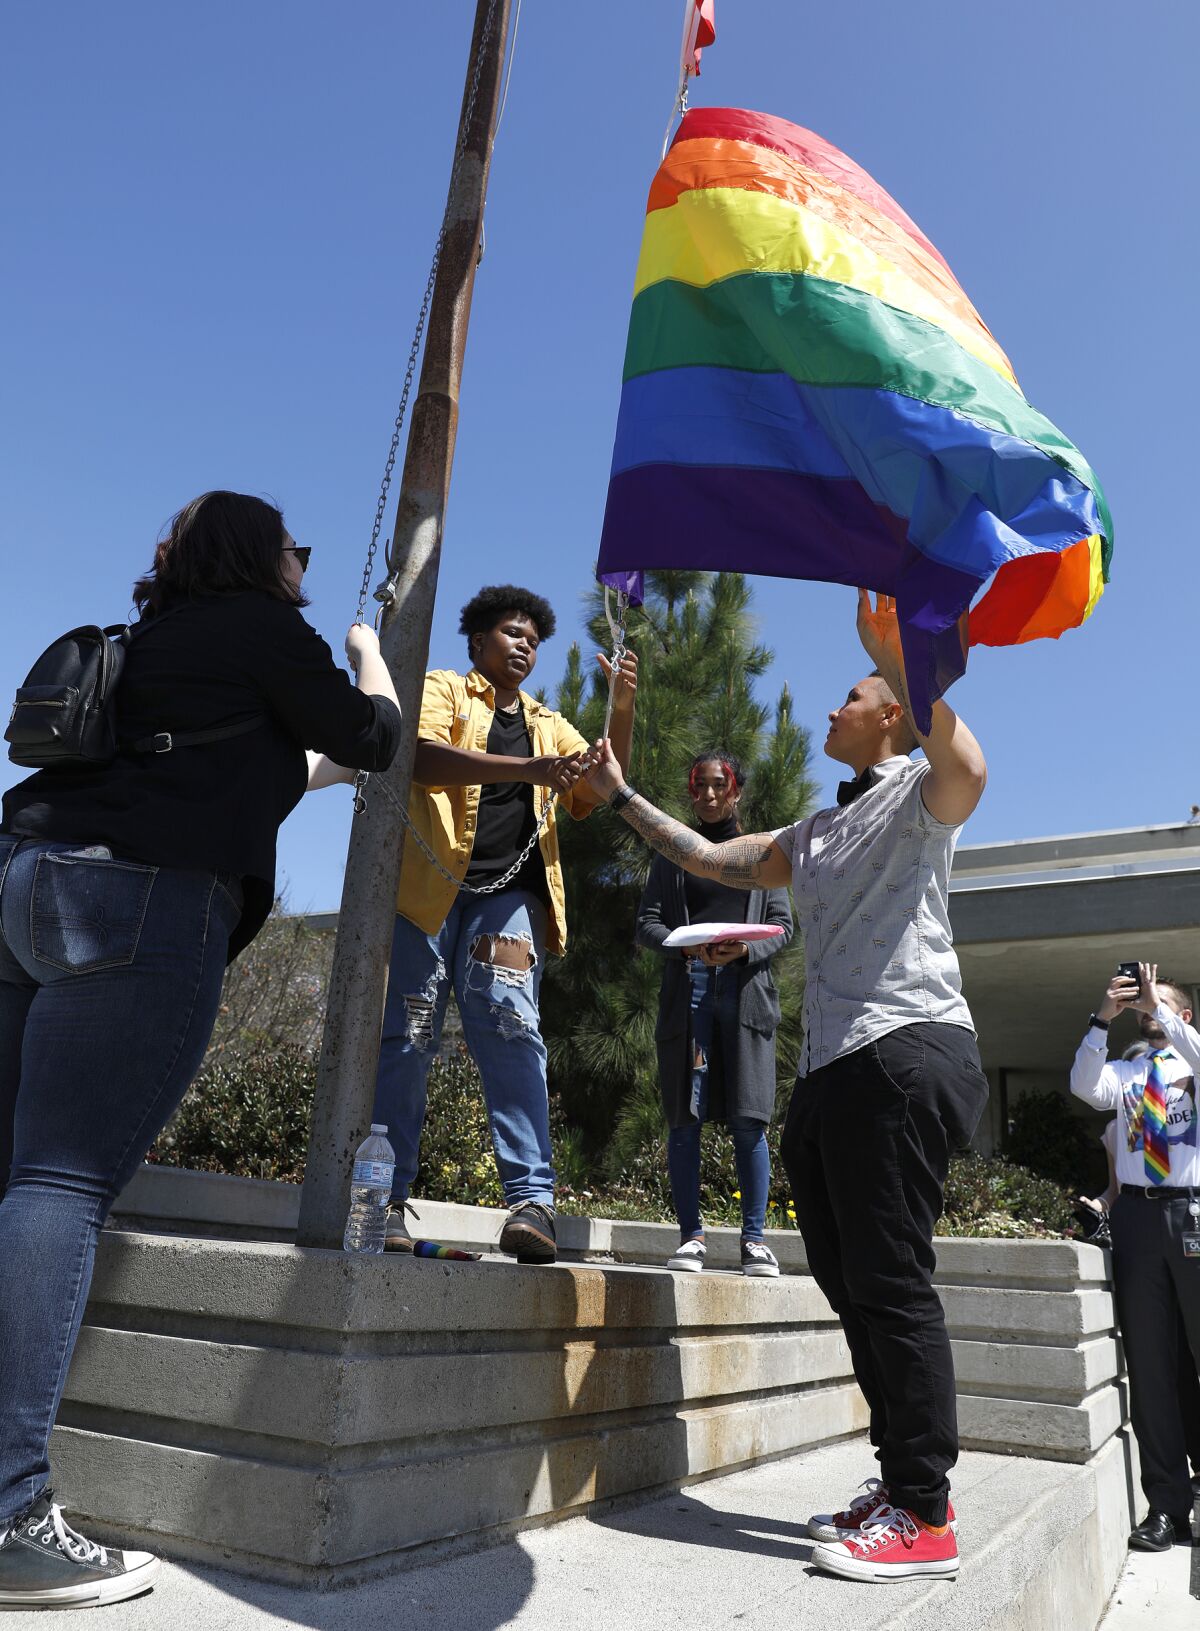 San Diego Unified School District Friday raised a pride flag and Trans flag at district headquarters for the first time in its history. Students Jay Sieber (left), Savion Morgan Cooper (center), Samsara Drapiza (background) and Ebonee Weathers, an SDUSD program manager (right) raised the LGBTQIA and Trans flags.